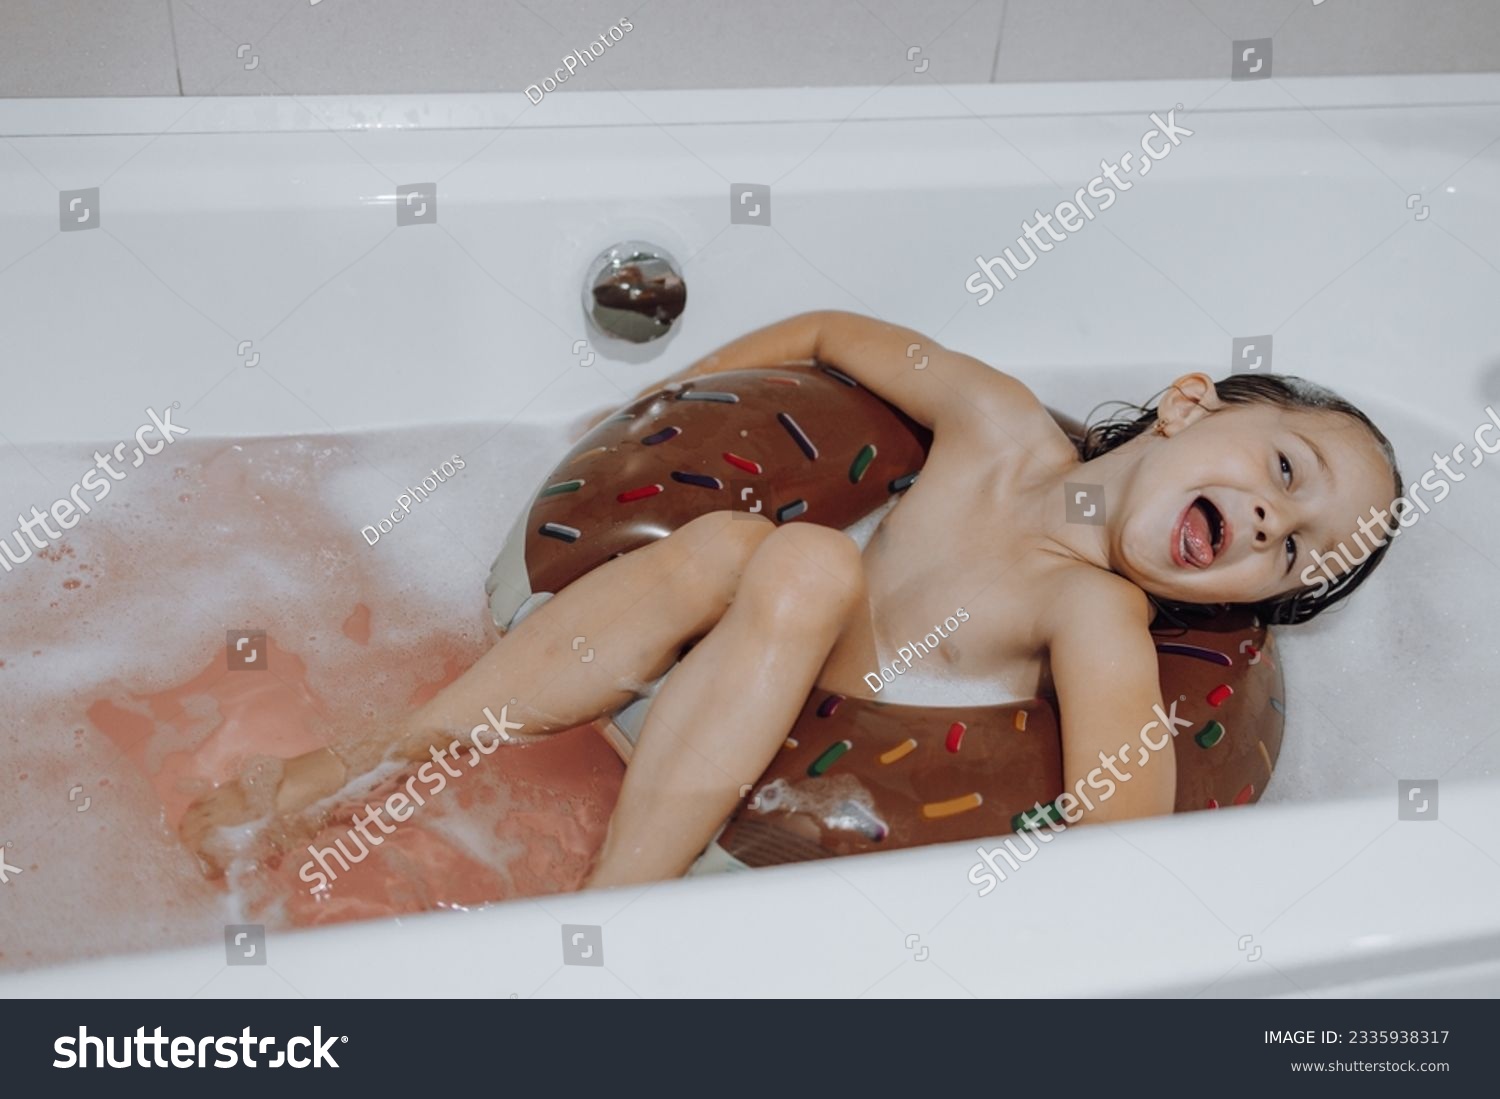 Best of Taking a bath naked